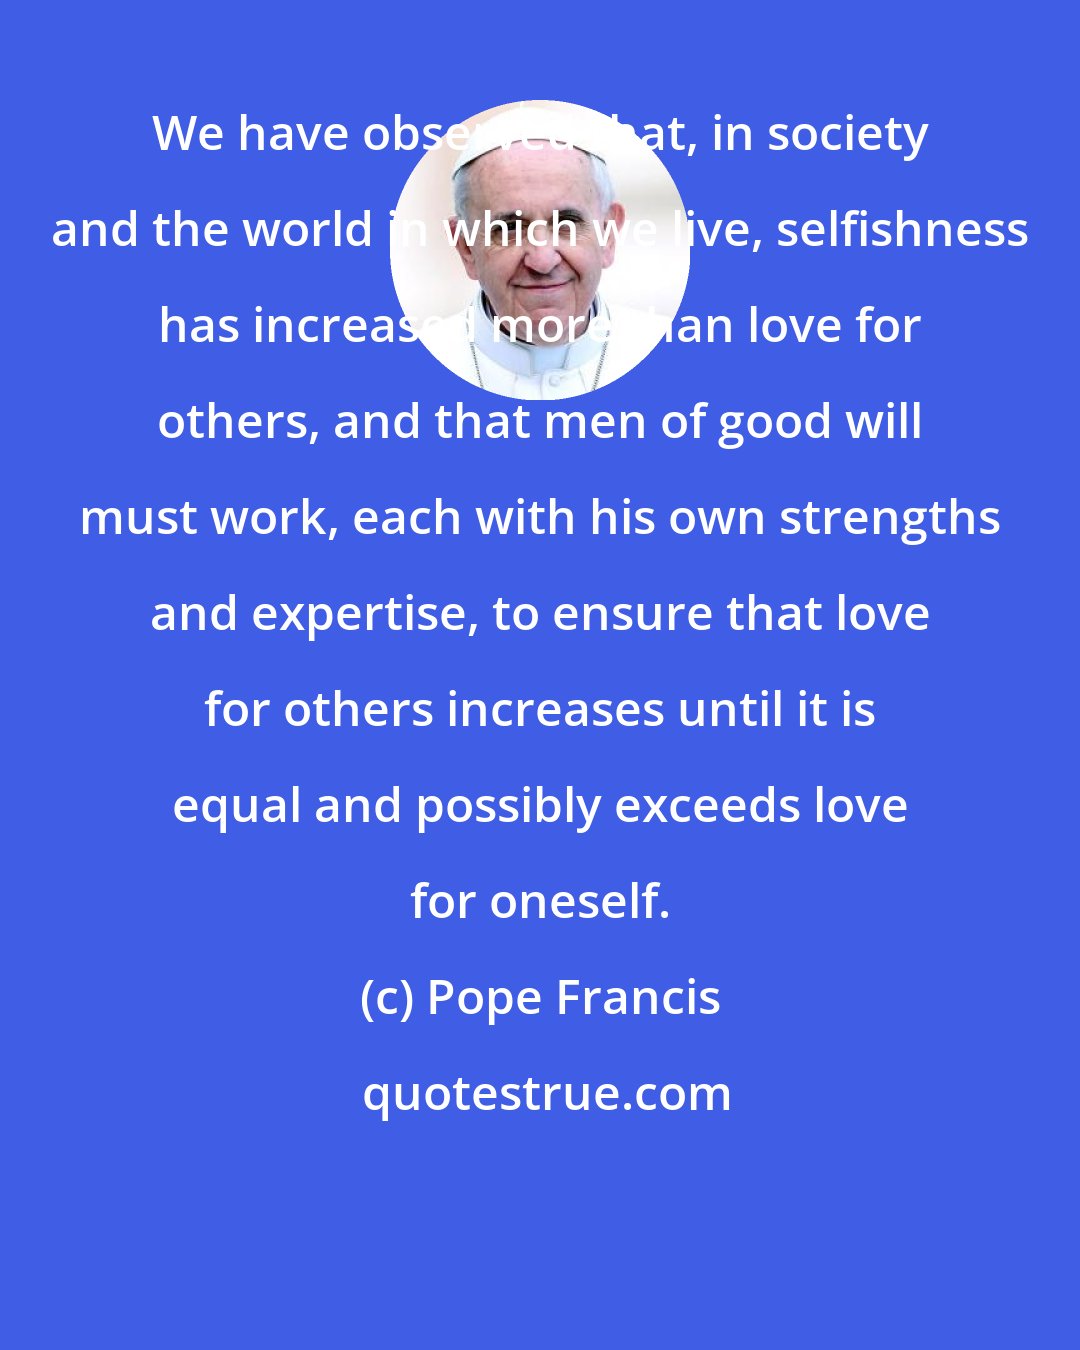 Pope Francis: We have observed that, in society and the world in which we live, selfishness has increased more than love for others, and that men of good will must work, each with his own strengths and expertise, to ensure that love for others increases until it is equal and possibly exceeds love for oneself.